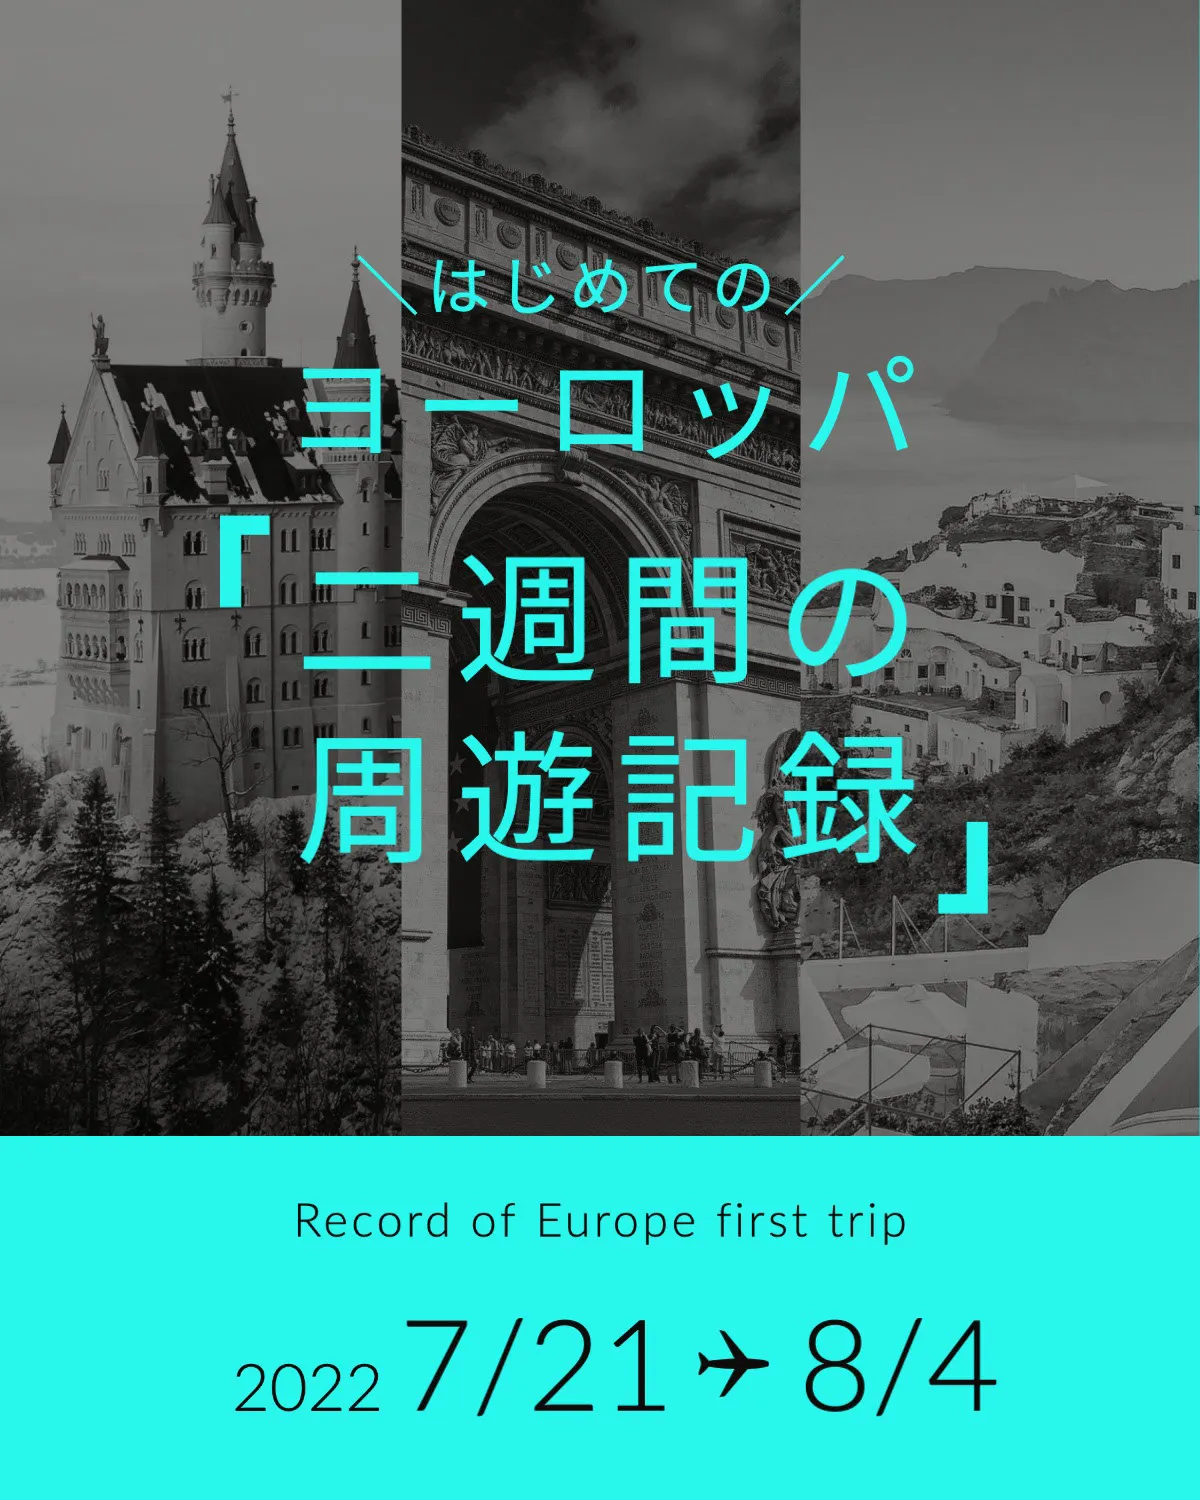 Europe travel record Instagram Photo Collage post